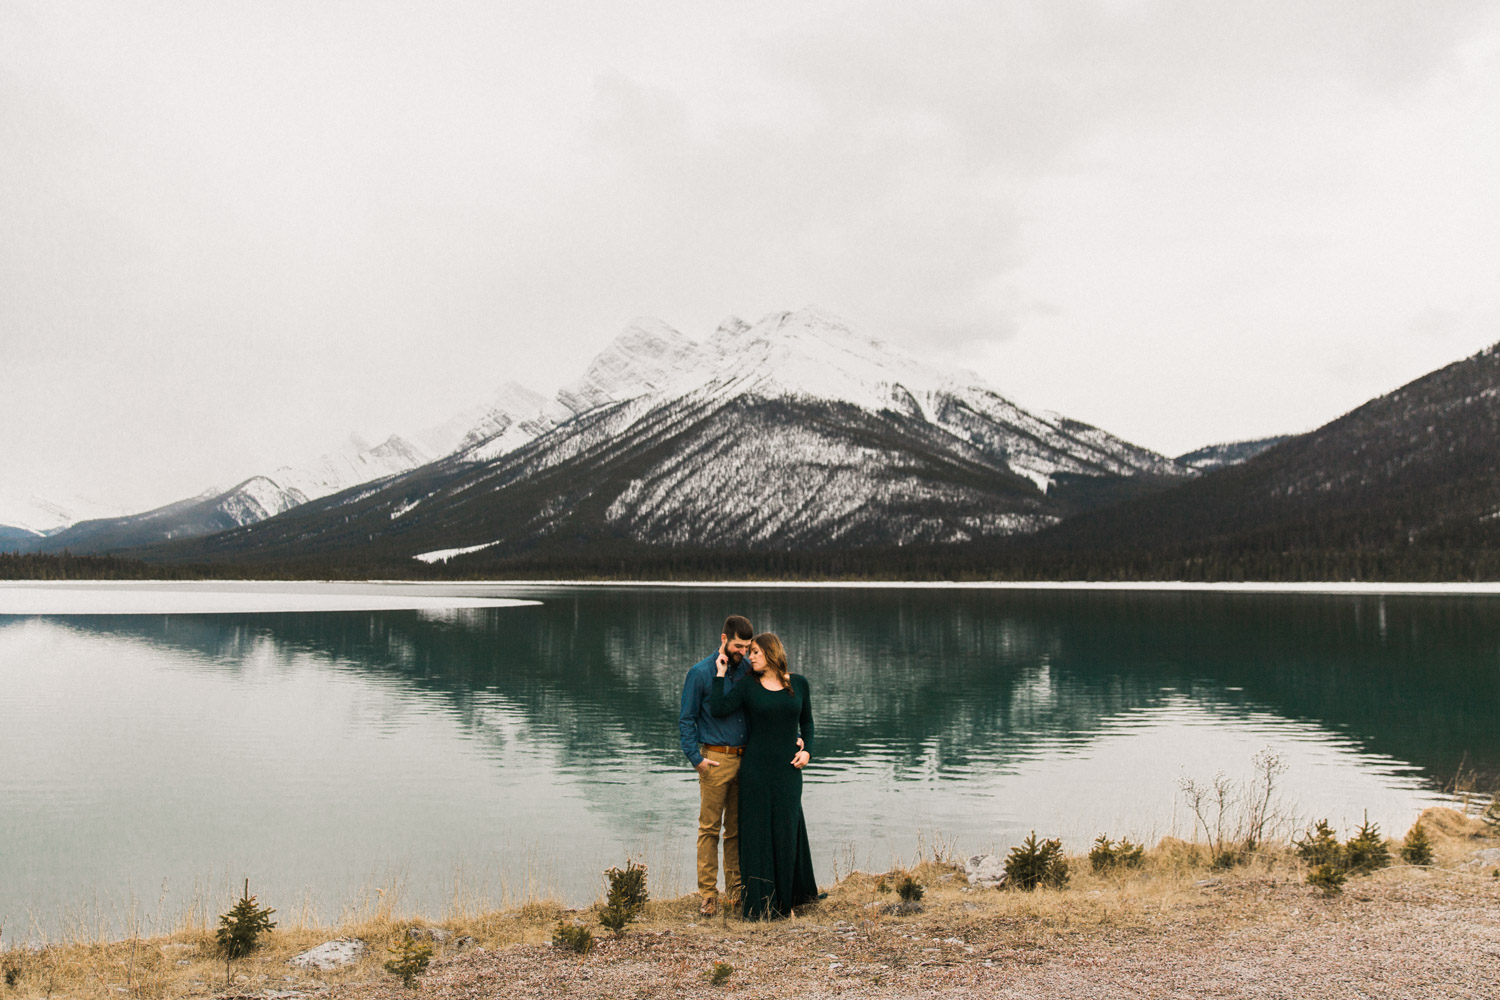 Canmore Anniversary Vacation Photographer Guenard Photography